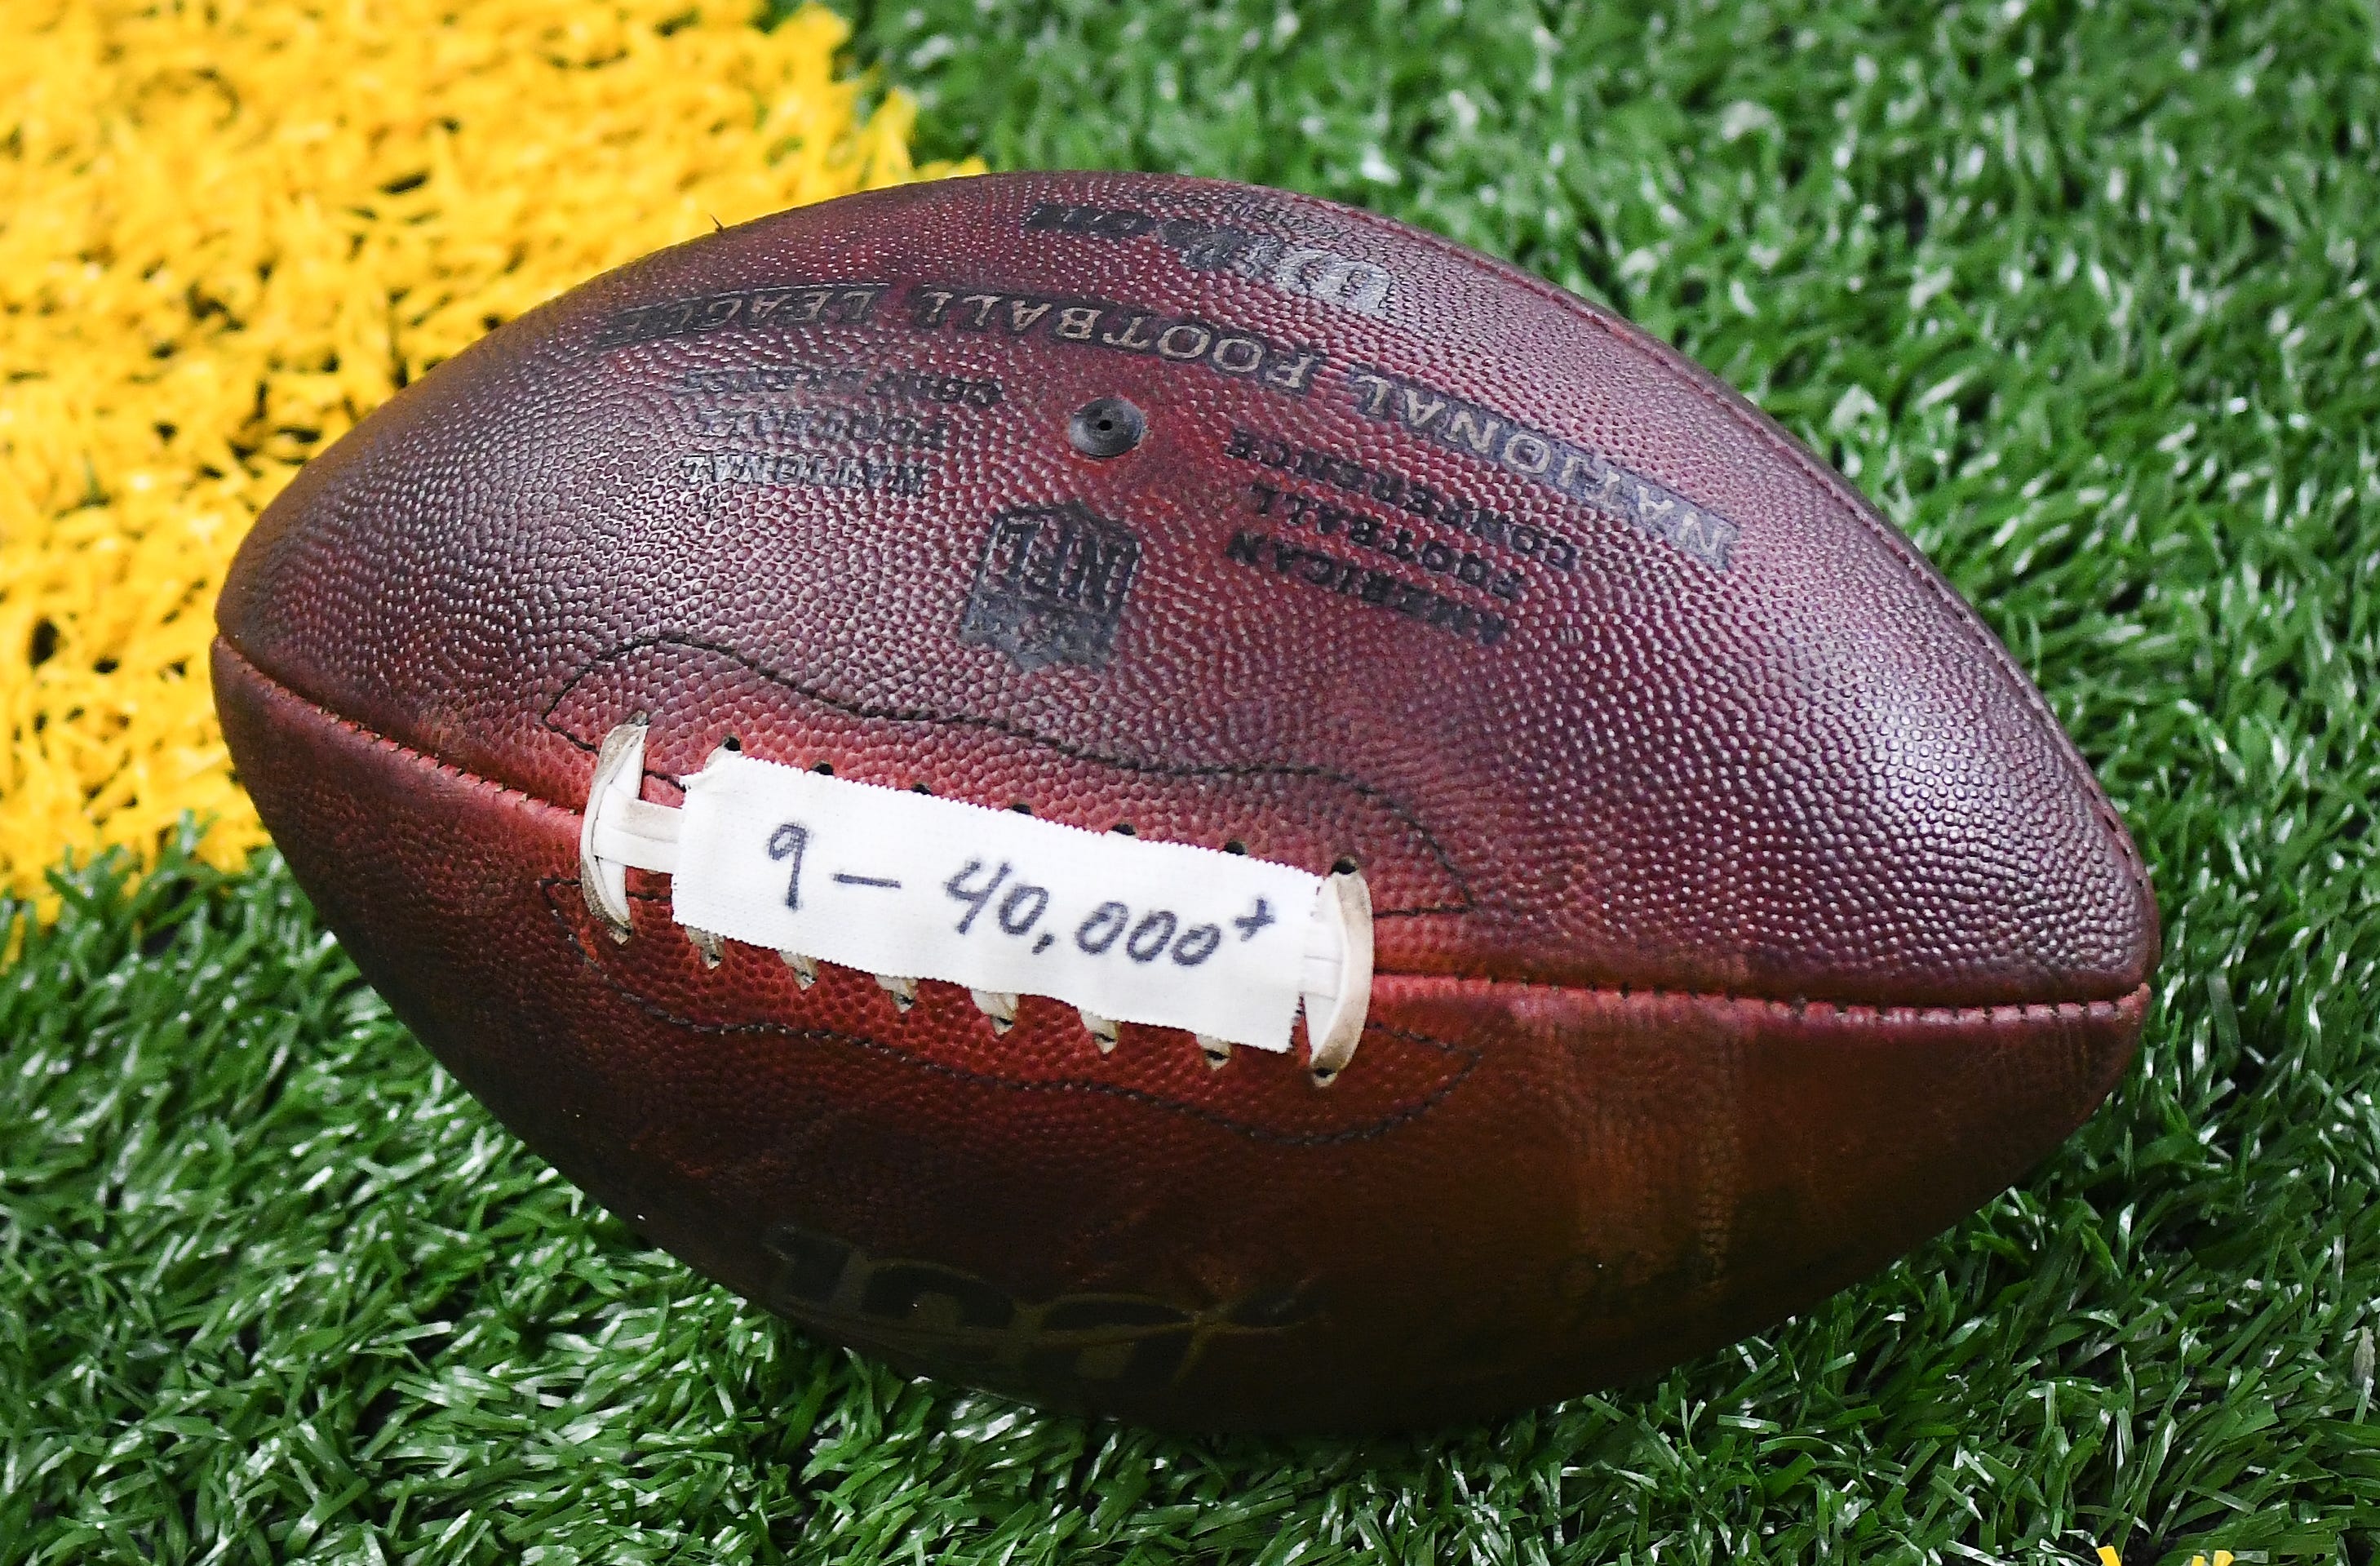 The ball that Lions quarterback Matthew Stafford threw to become the fastest player in NFL history to reach 40,000 passing yards from the game against the Vikings at Ford Field.